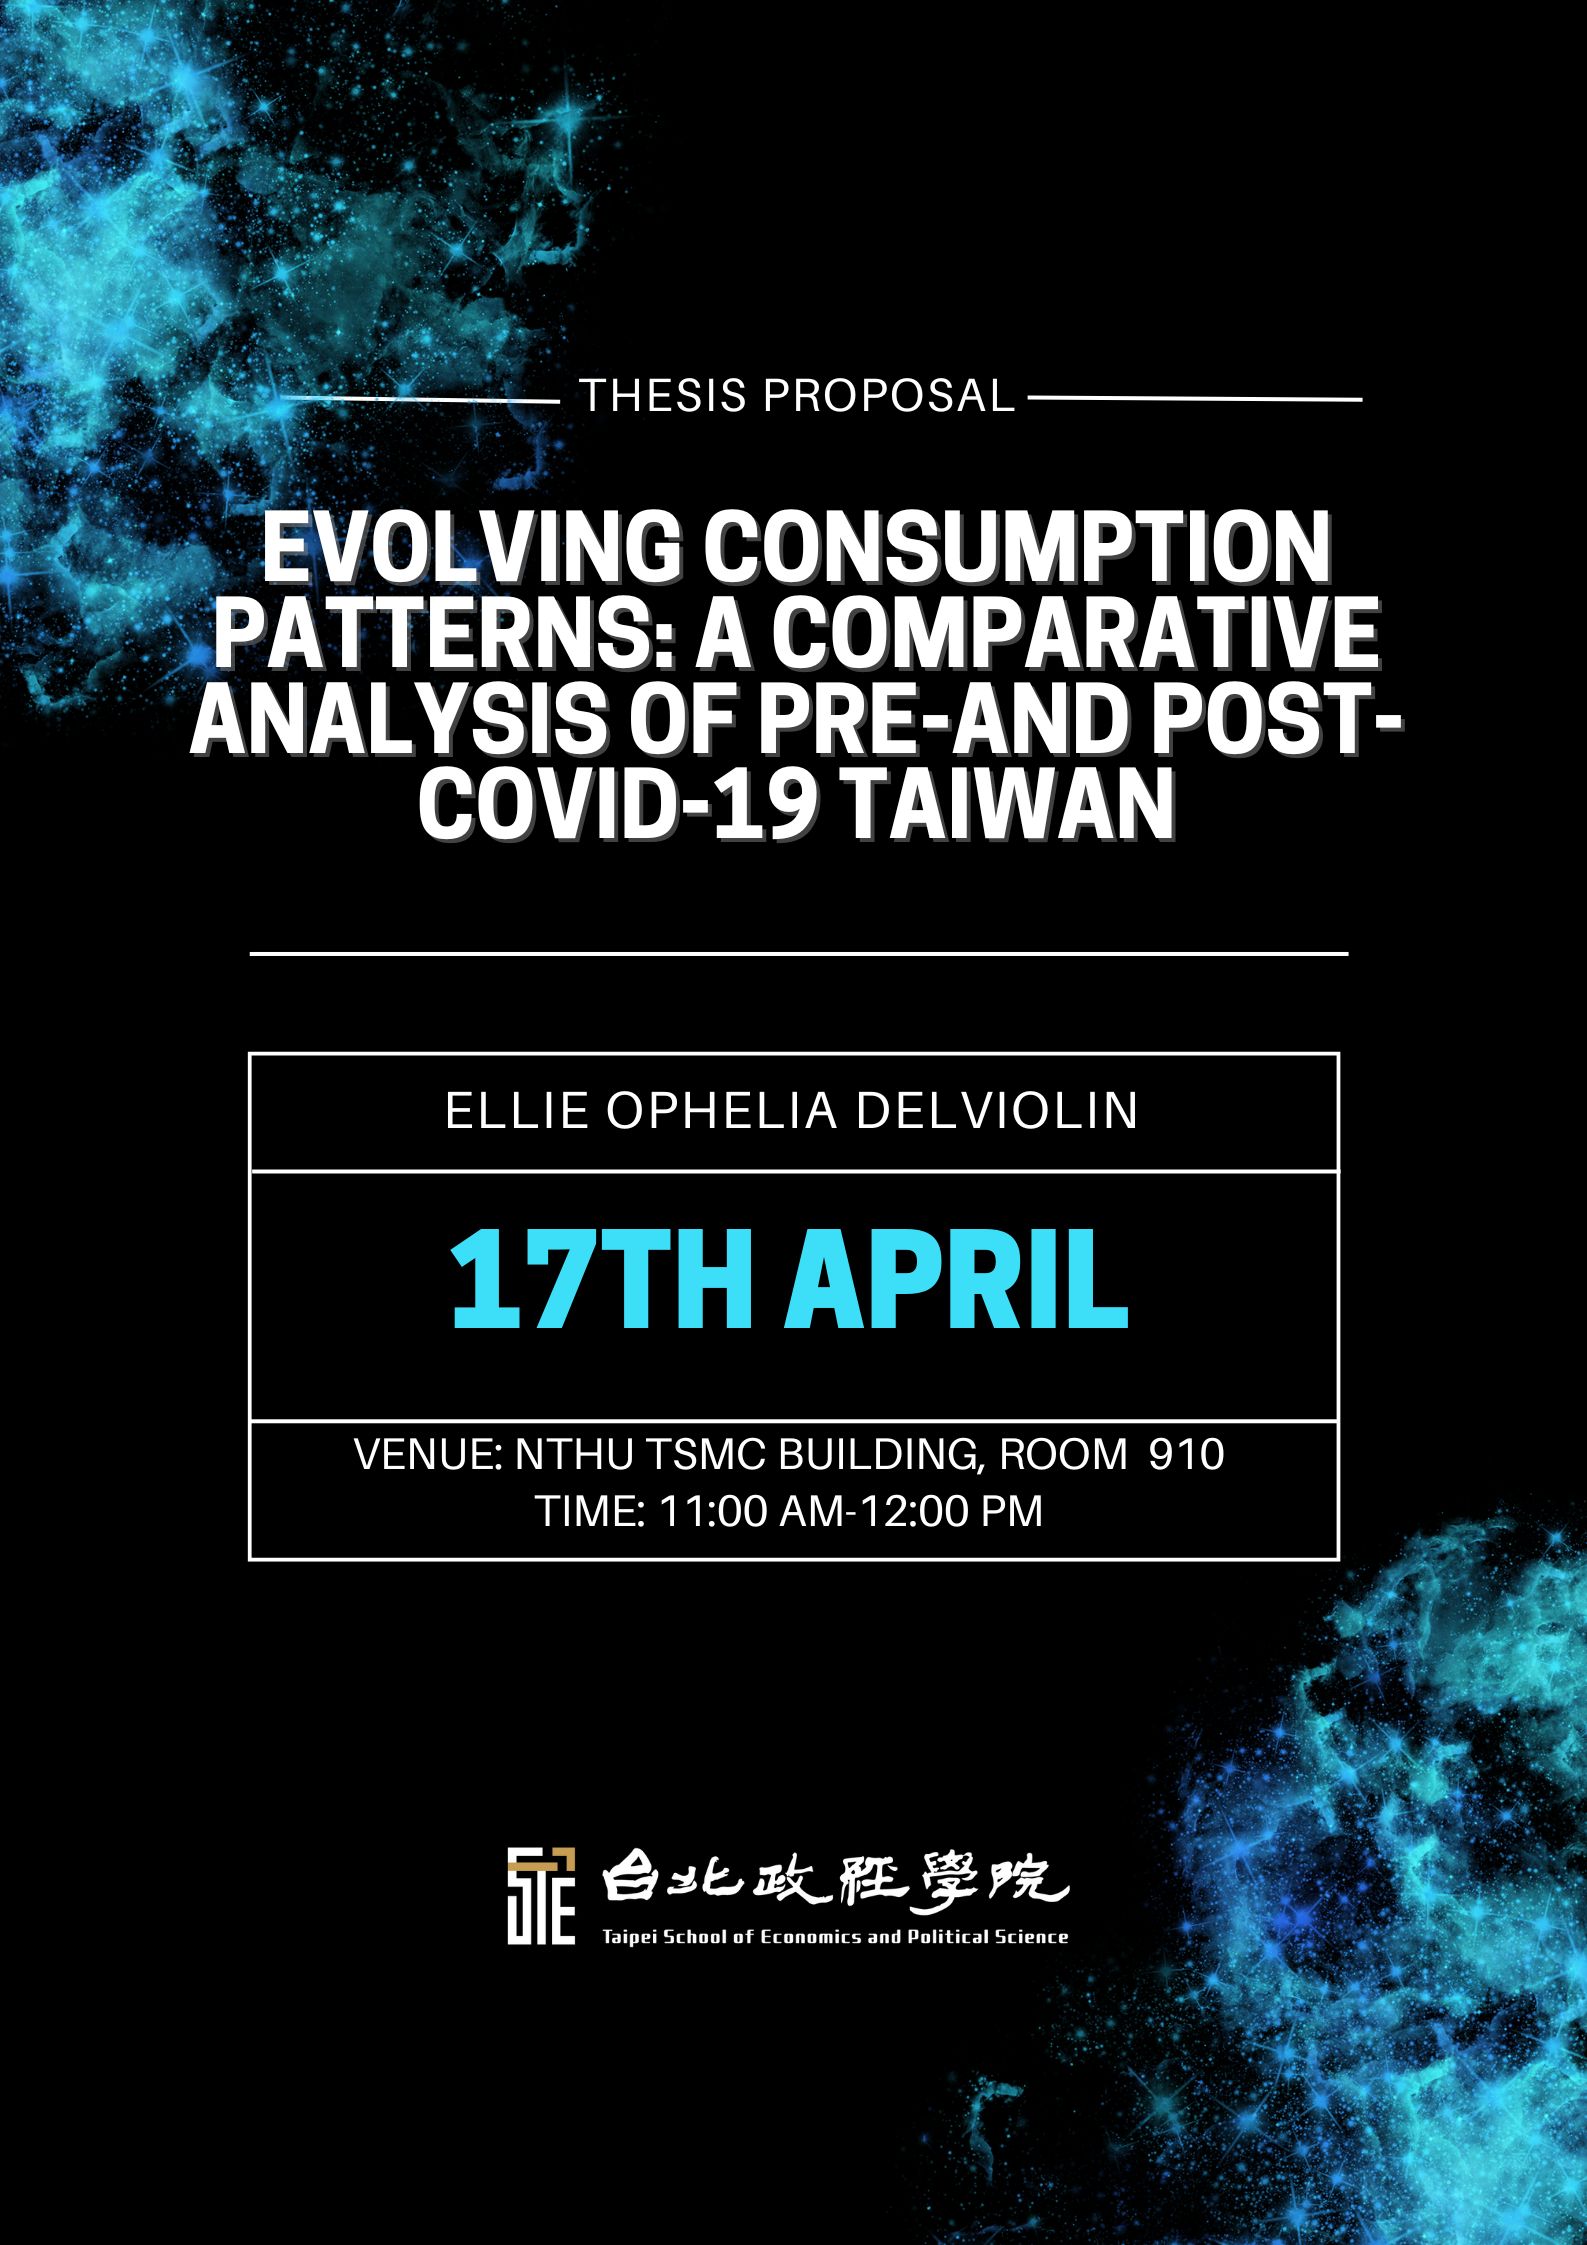 MA Thesis Proposal Presentation at TSMC building 910 on April 17 2024 at 11:00 A titled "Evolving Consumption Patterns: A comparative Analysis of pre-and Post-COVID-19 Taiwan" by Ellie Ophelia Delviolin